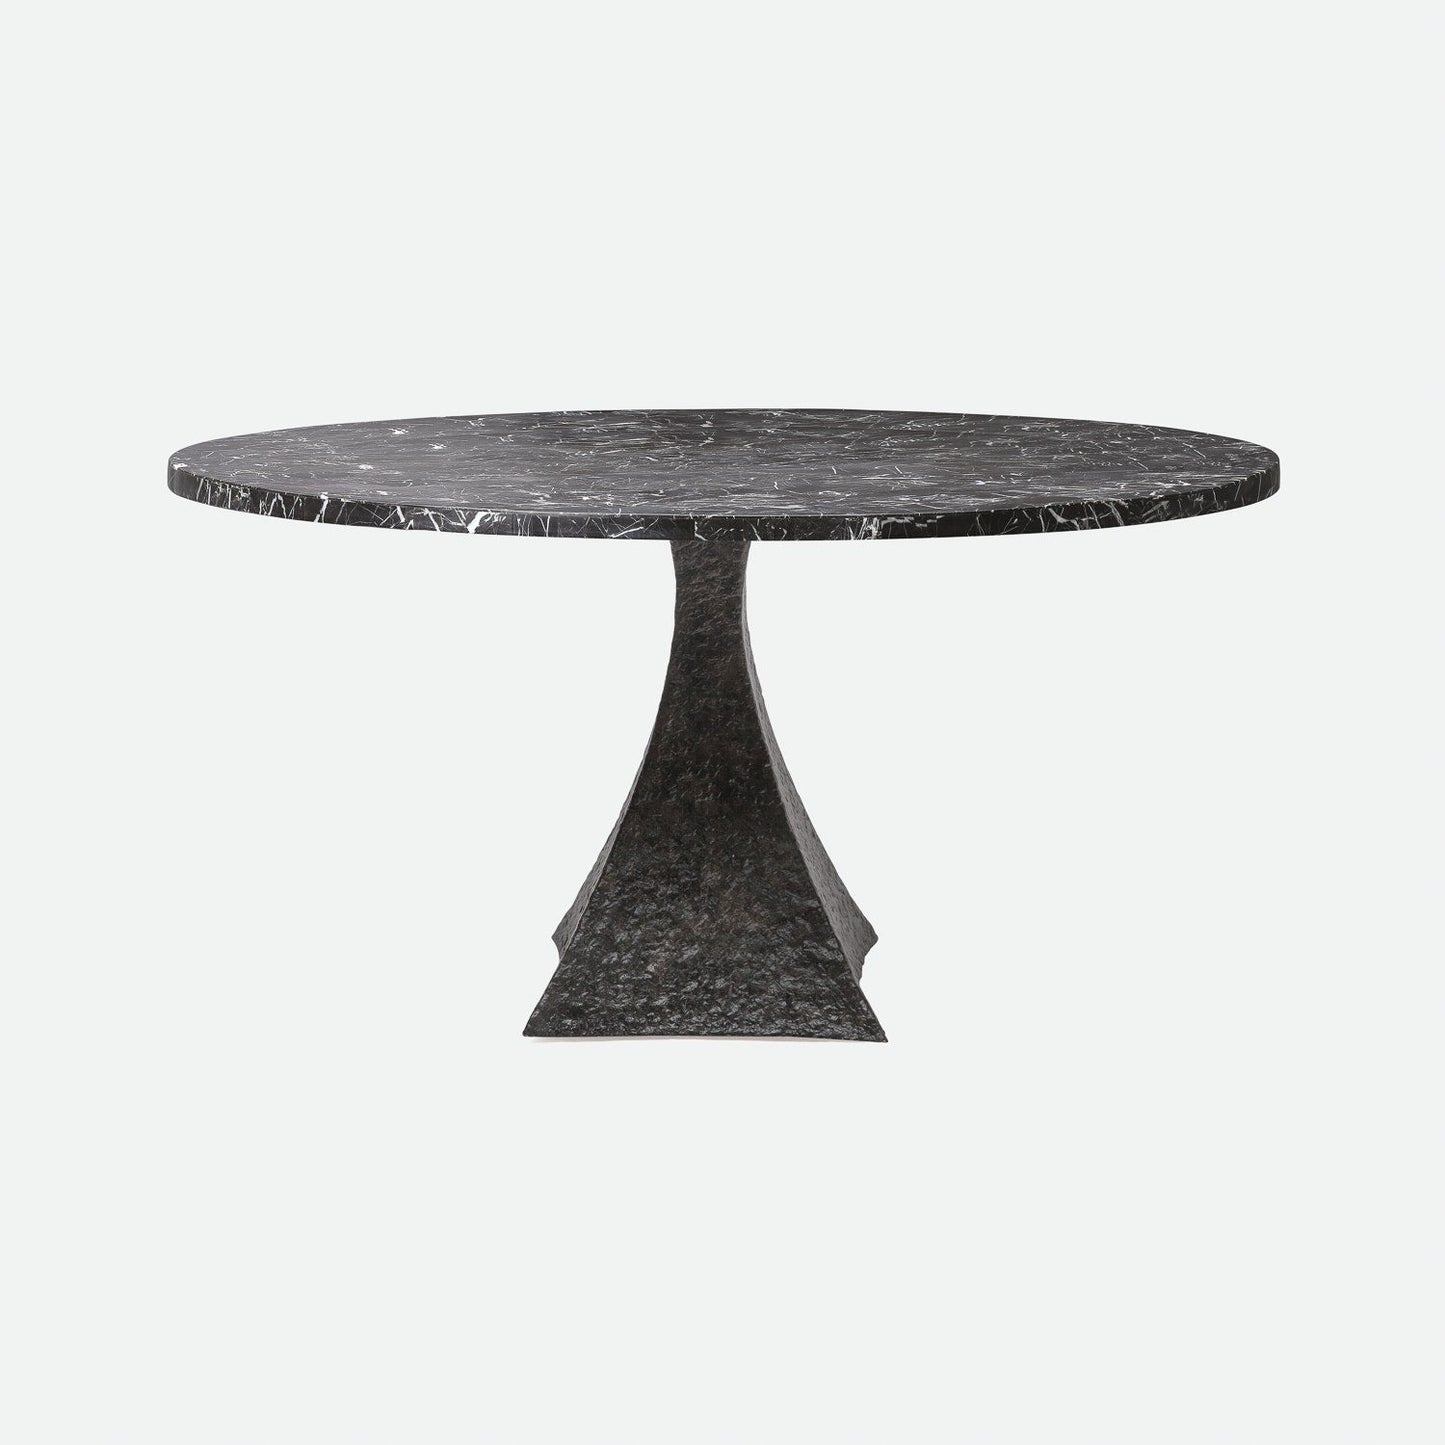 Made Goods Noor 54" x 30" Bumpy Black Iron Dinning Table With Round Nero Marble Table Top